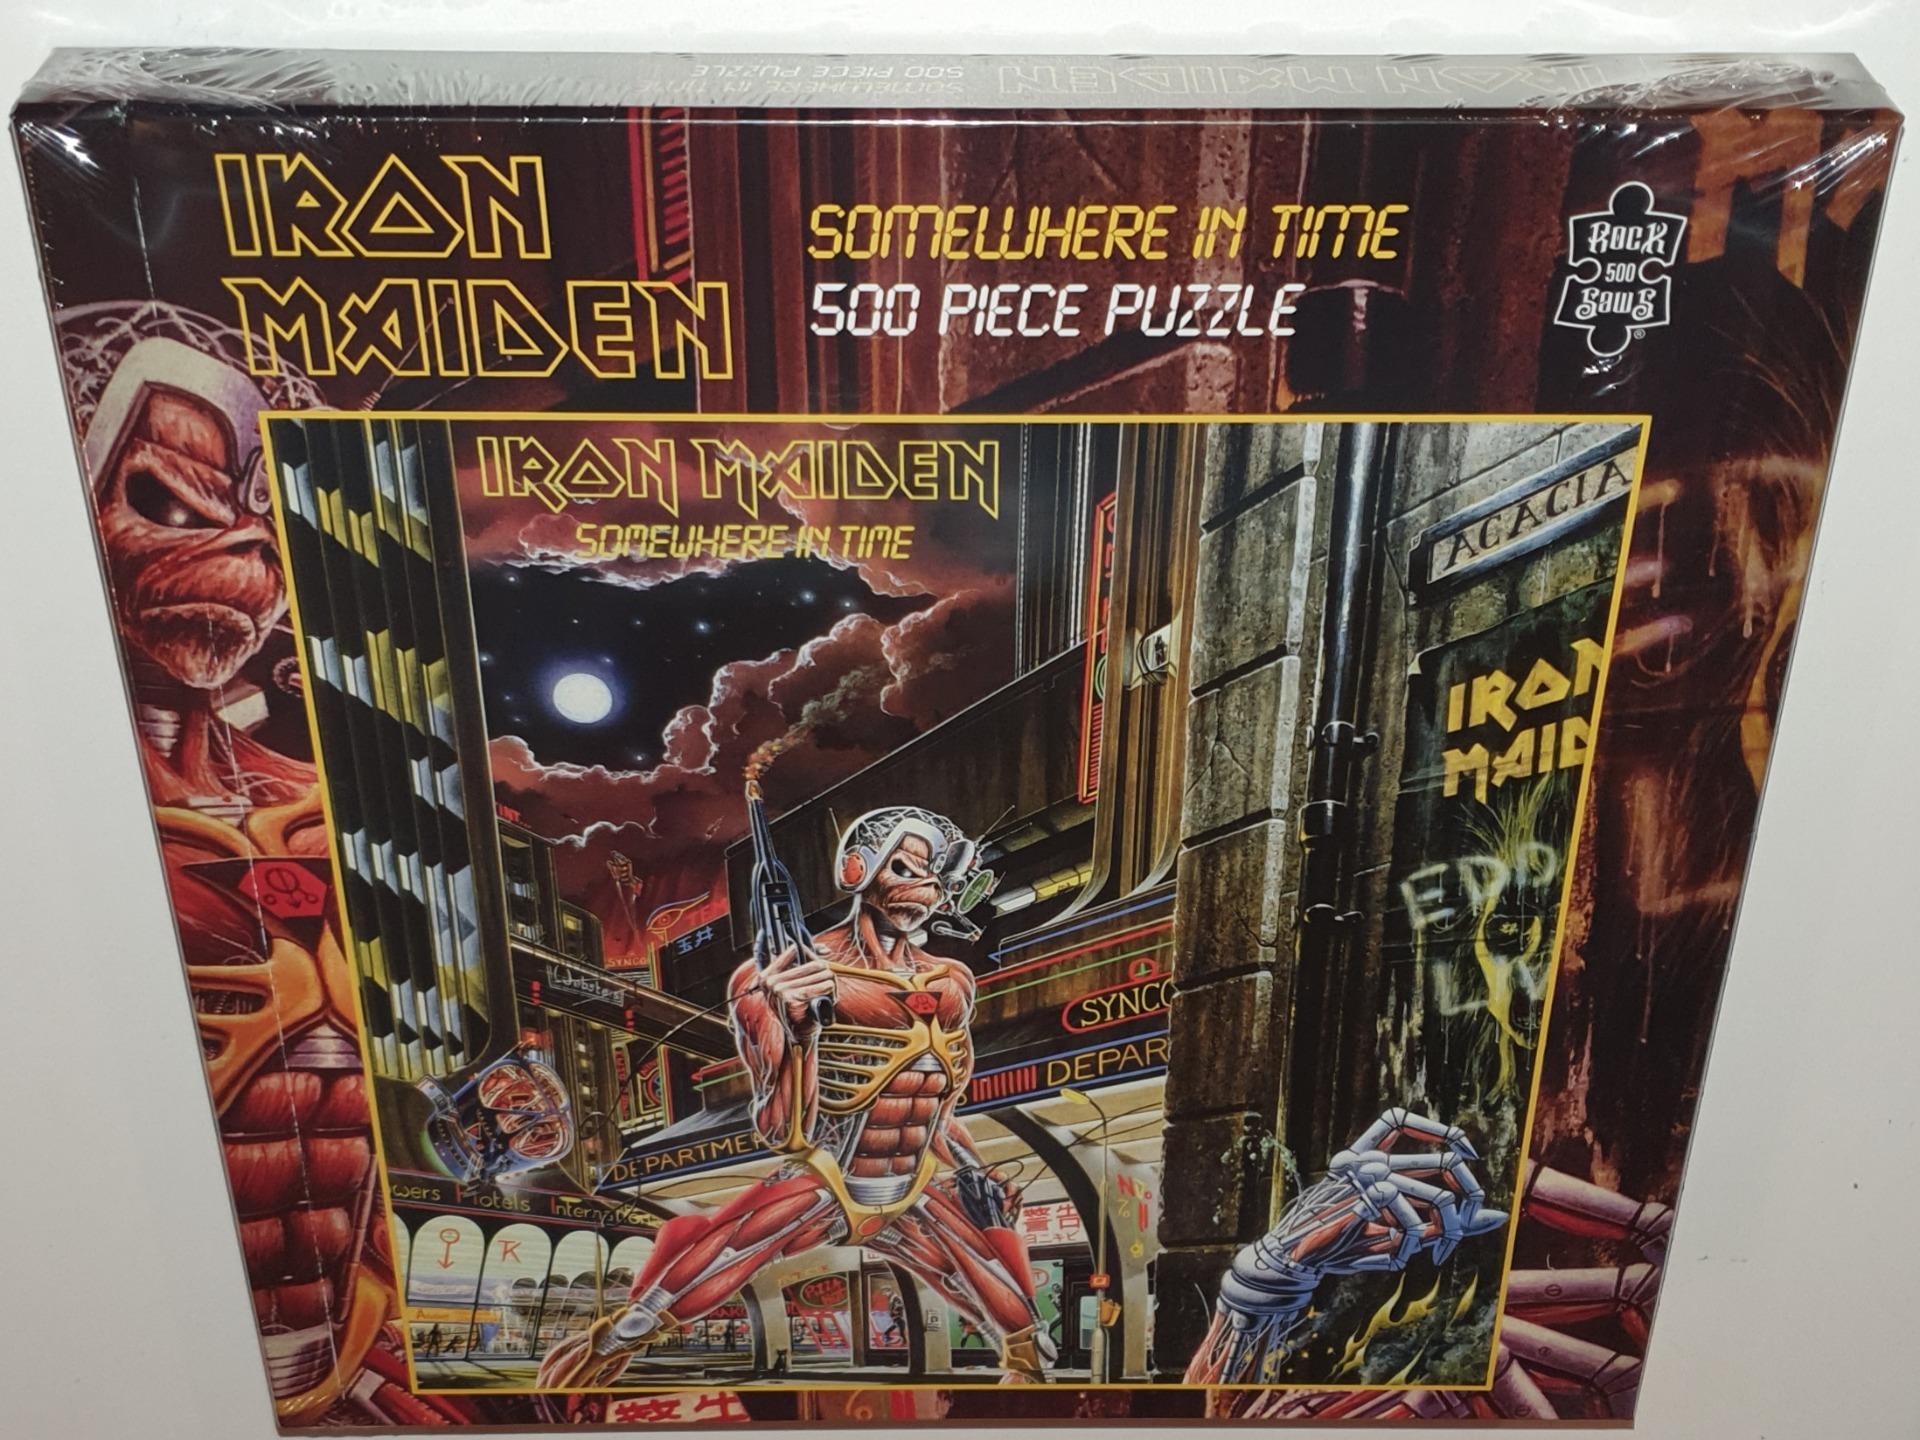 Iron Maiden Somewhere In Time LP Album Art Jigsaw Puzzle New Official